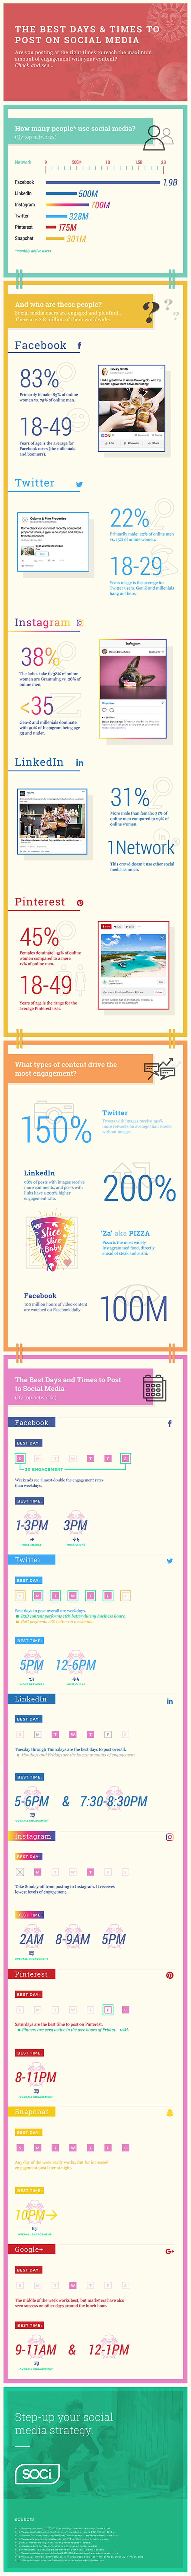 Best-Days-and-Times-to-Post-to-Social-Media-Infographic.jpg